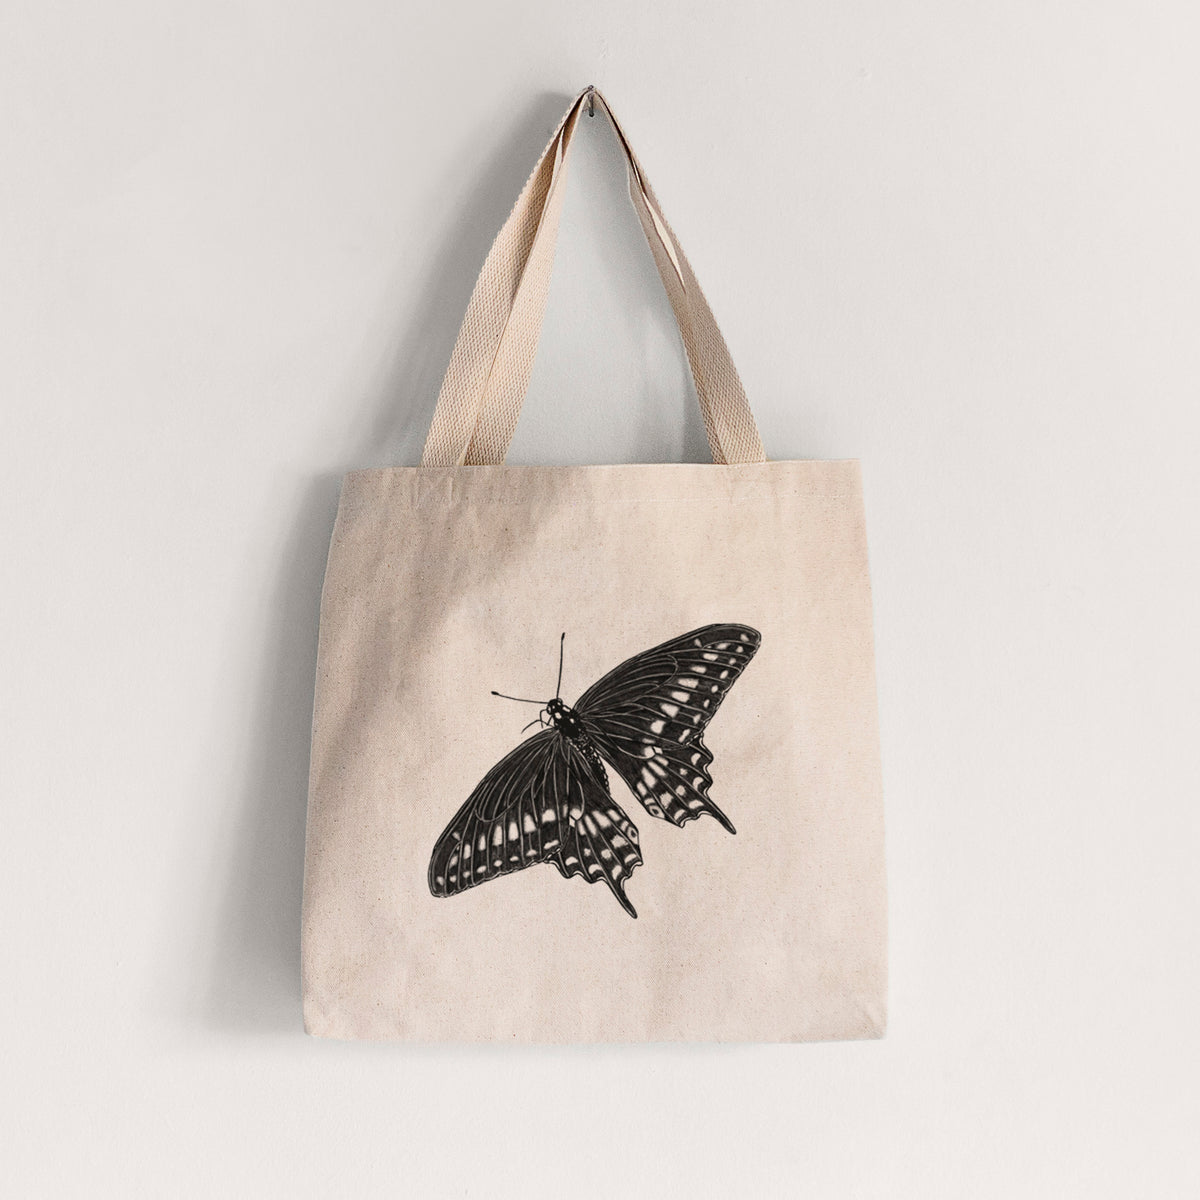 Black Swallowtail Butterfly - Papilio polyxenes - Tote Bag